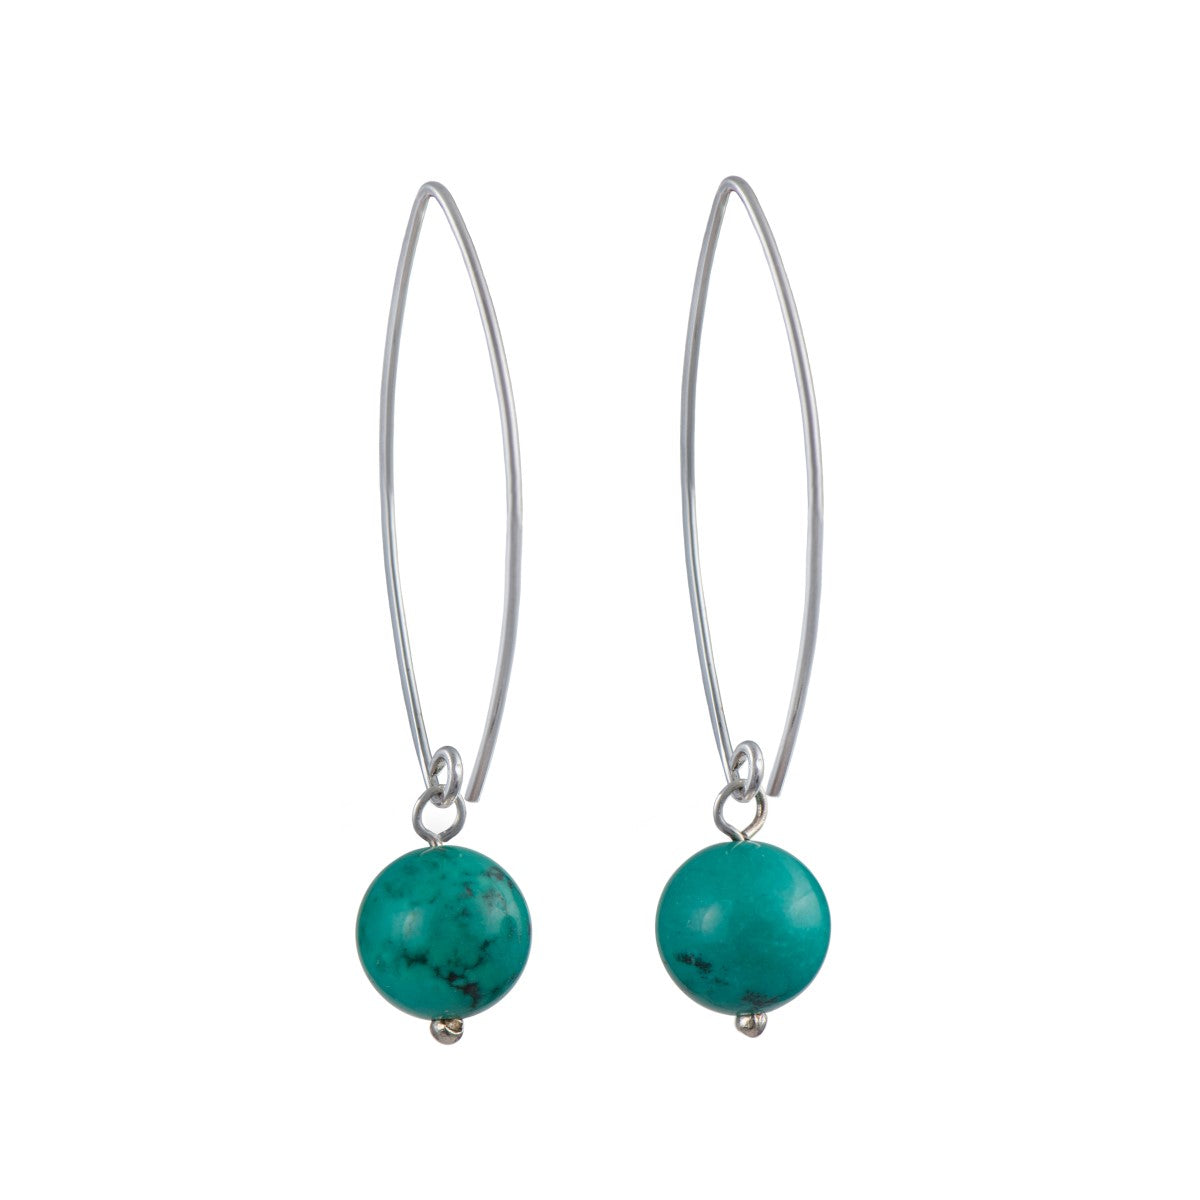 Long Sterling Silver Threader Earrings with Turquoise Drop